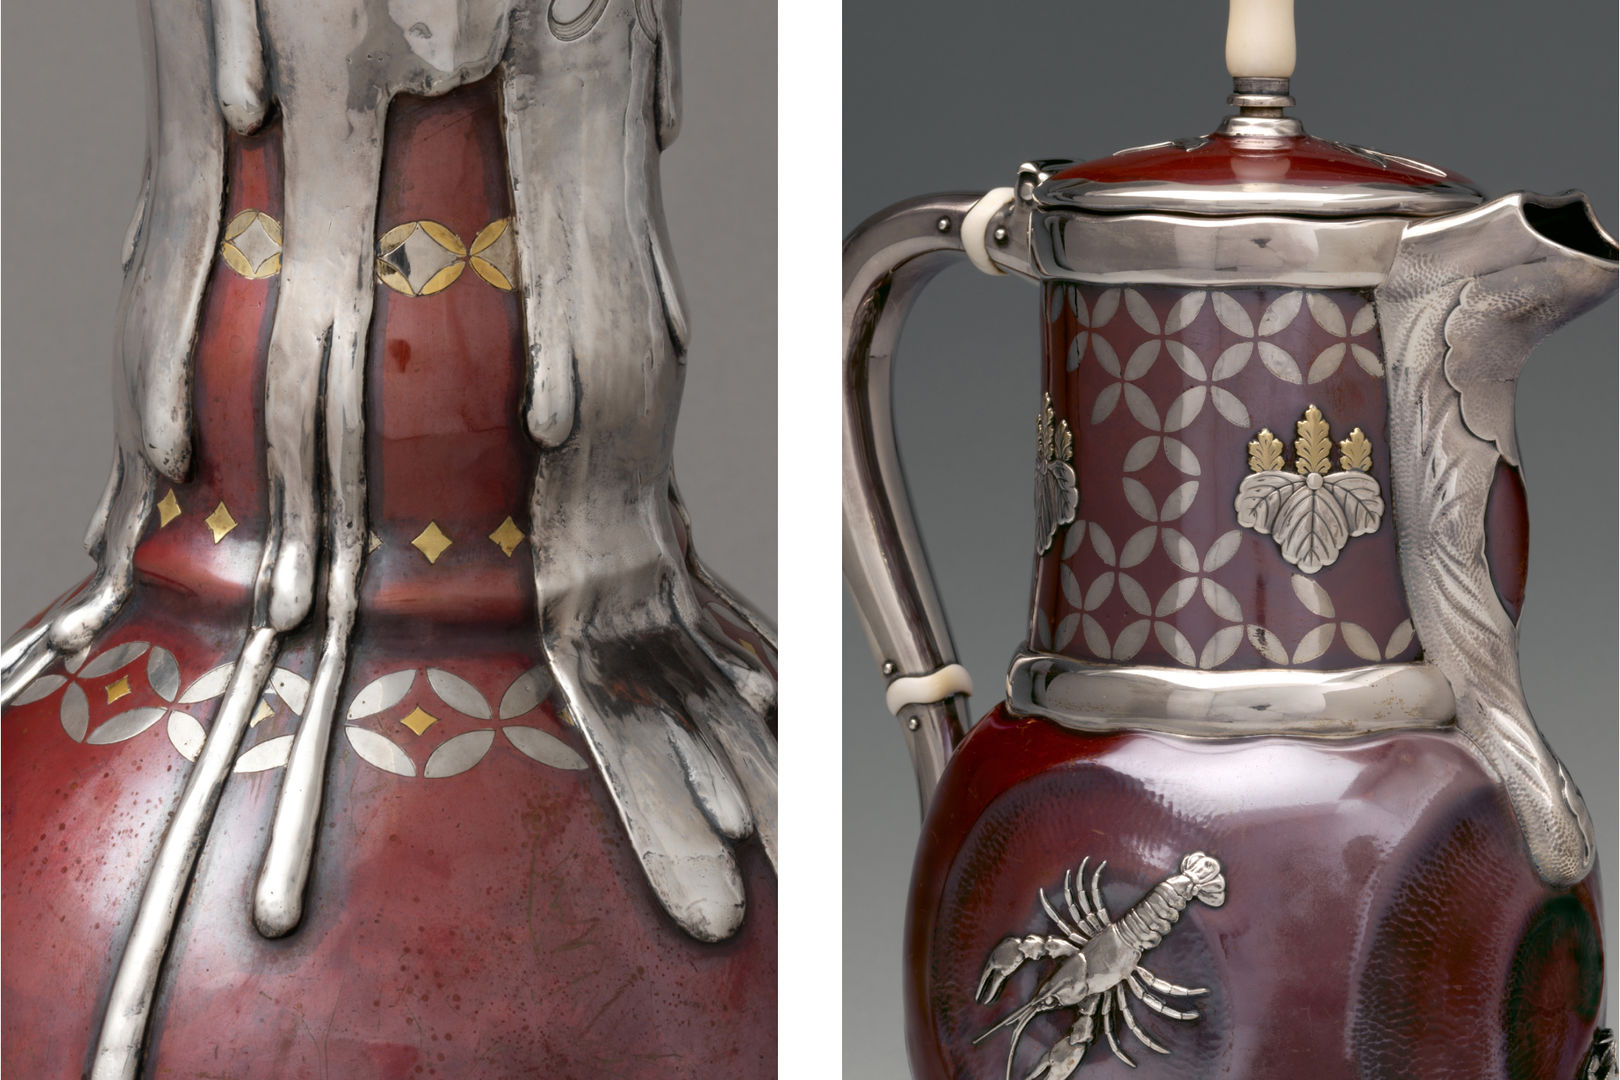 Composite image of a patinated vase and chocolate pot made of silver, copper, and gold. On the left, a close up of the neck of the vase shows a repeating patterned inlay design of silver petal shapes arranged in a circle, interrupted by silver drips that run down the sides of the neck. On the right, a close up of the chocolate pot reveals the same inlay motif appearing all across the neck of the pot.